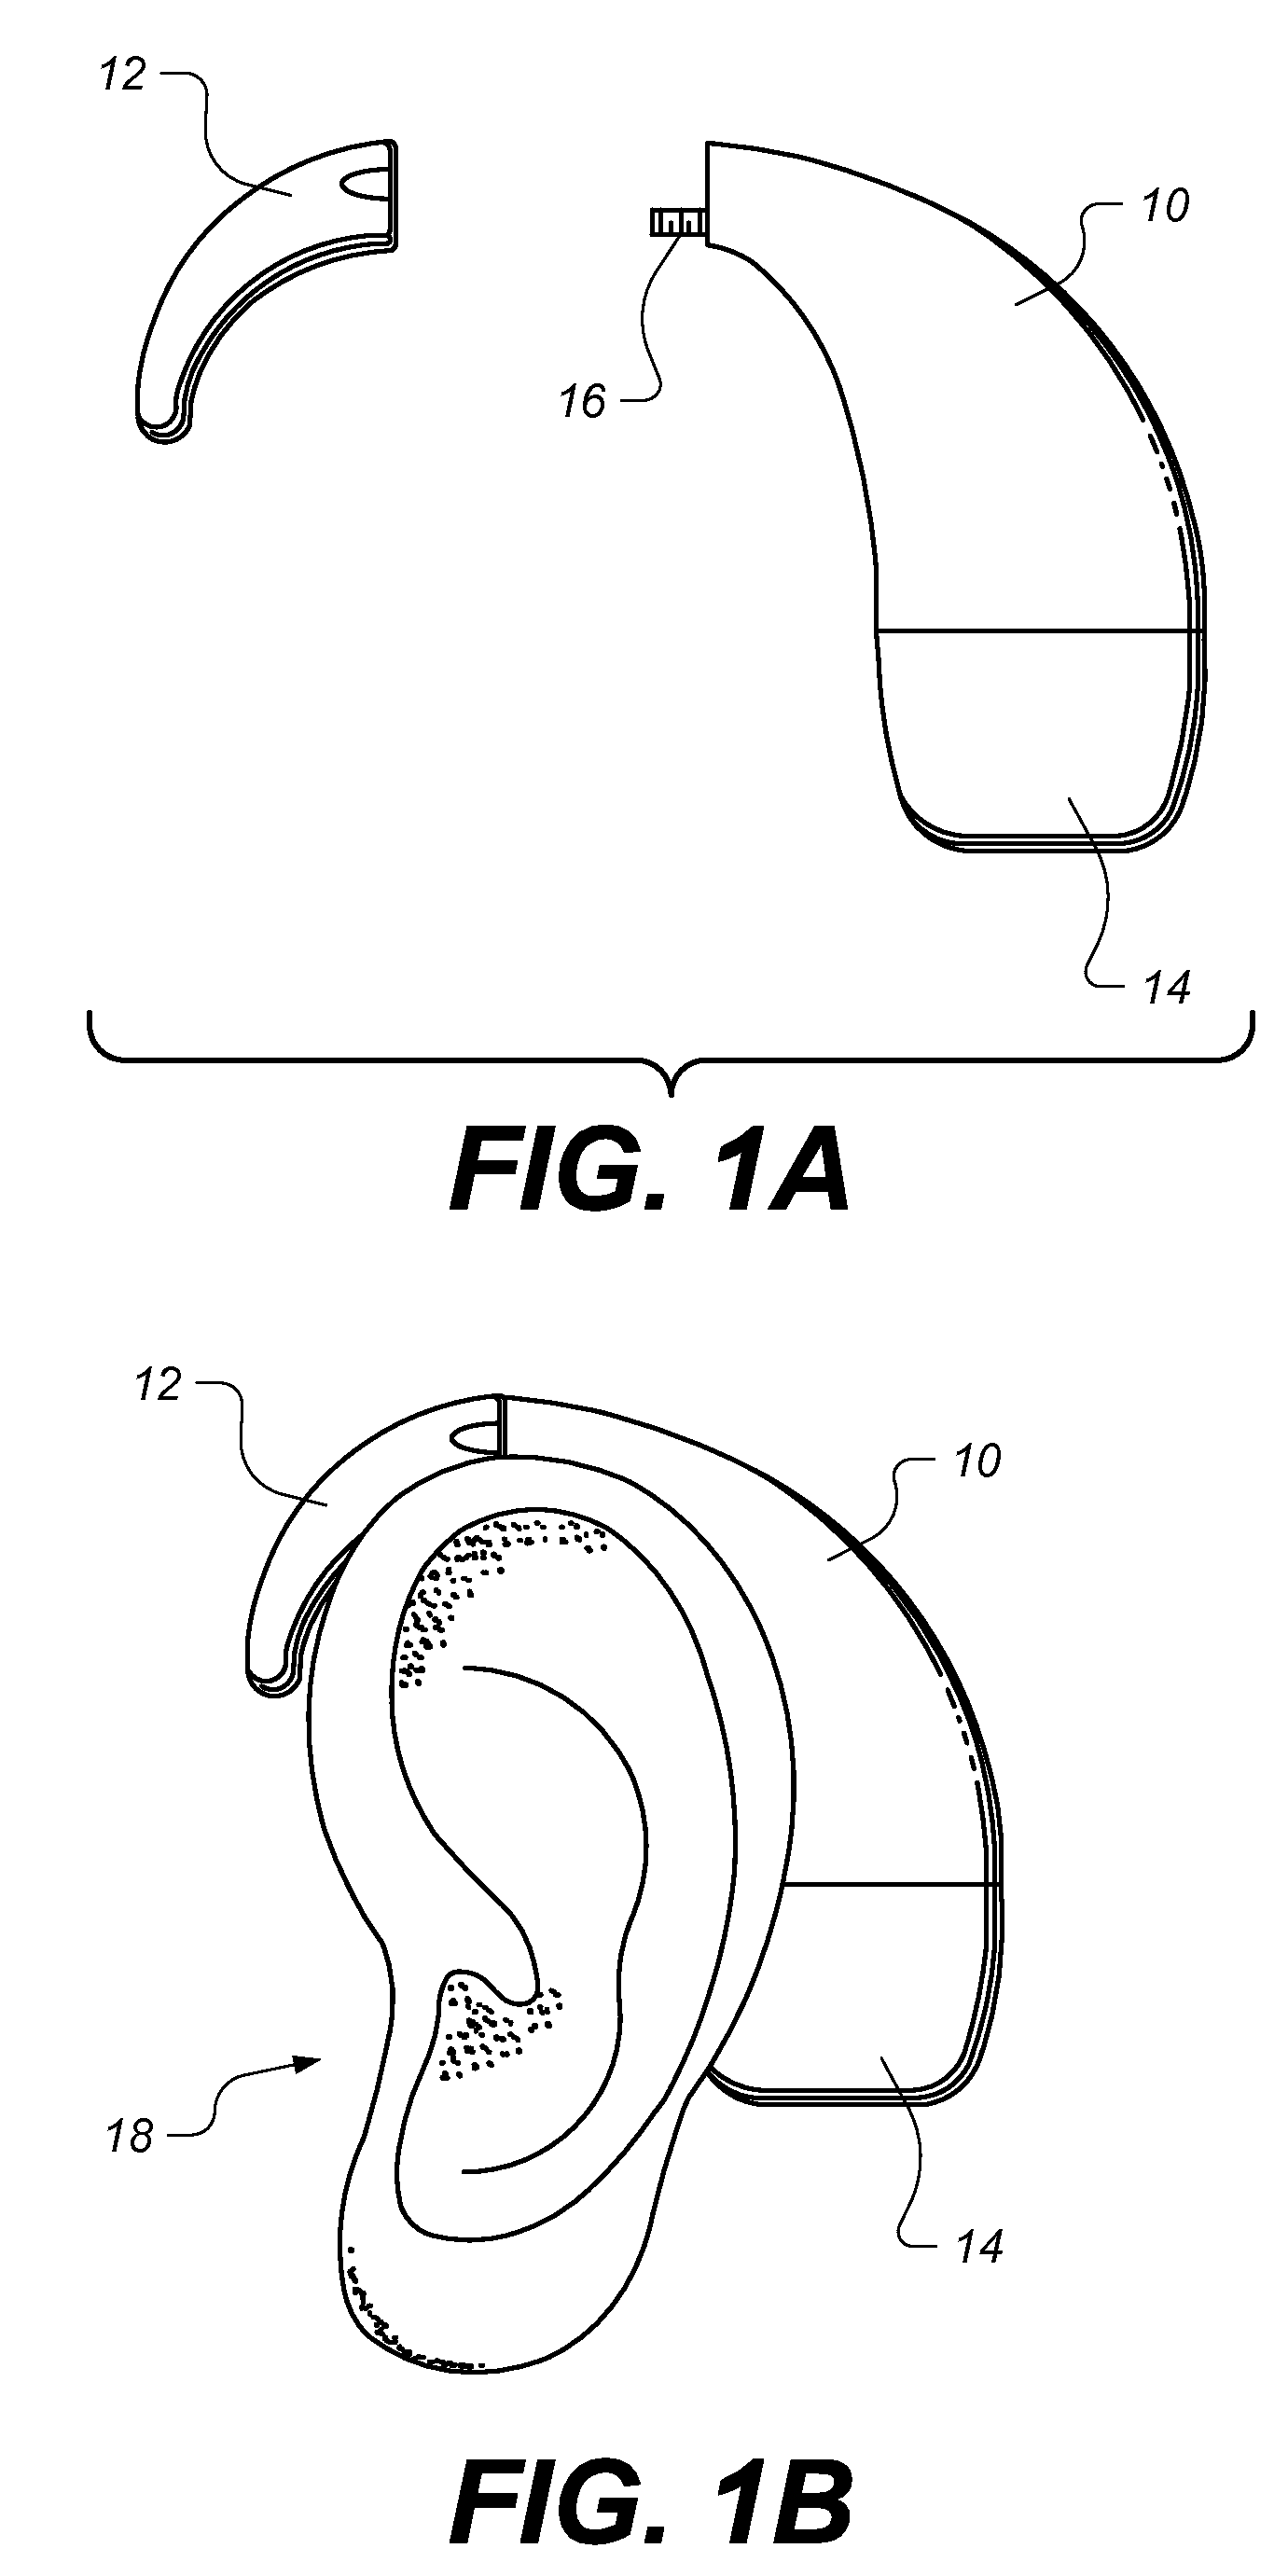 Accessory Adapter For Cochlear Implant System Providing Simultaneous T-Mic and External Audio Input